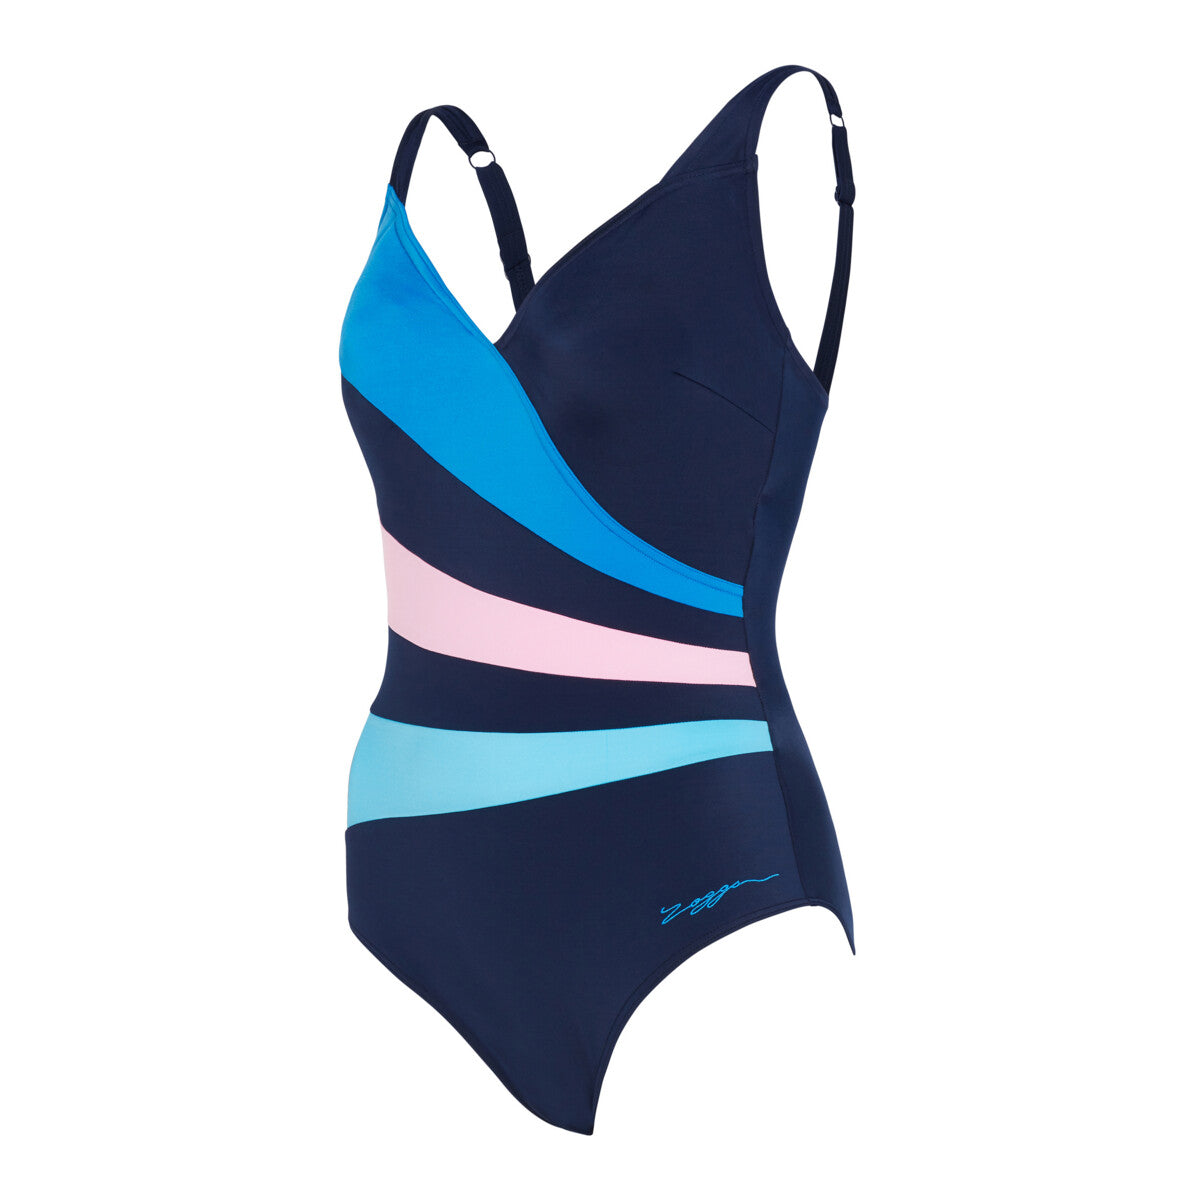 Swimming Costume Zoggs Wrap Panel Classicback Women - Navy/Blue/Pink